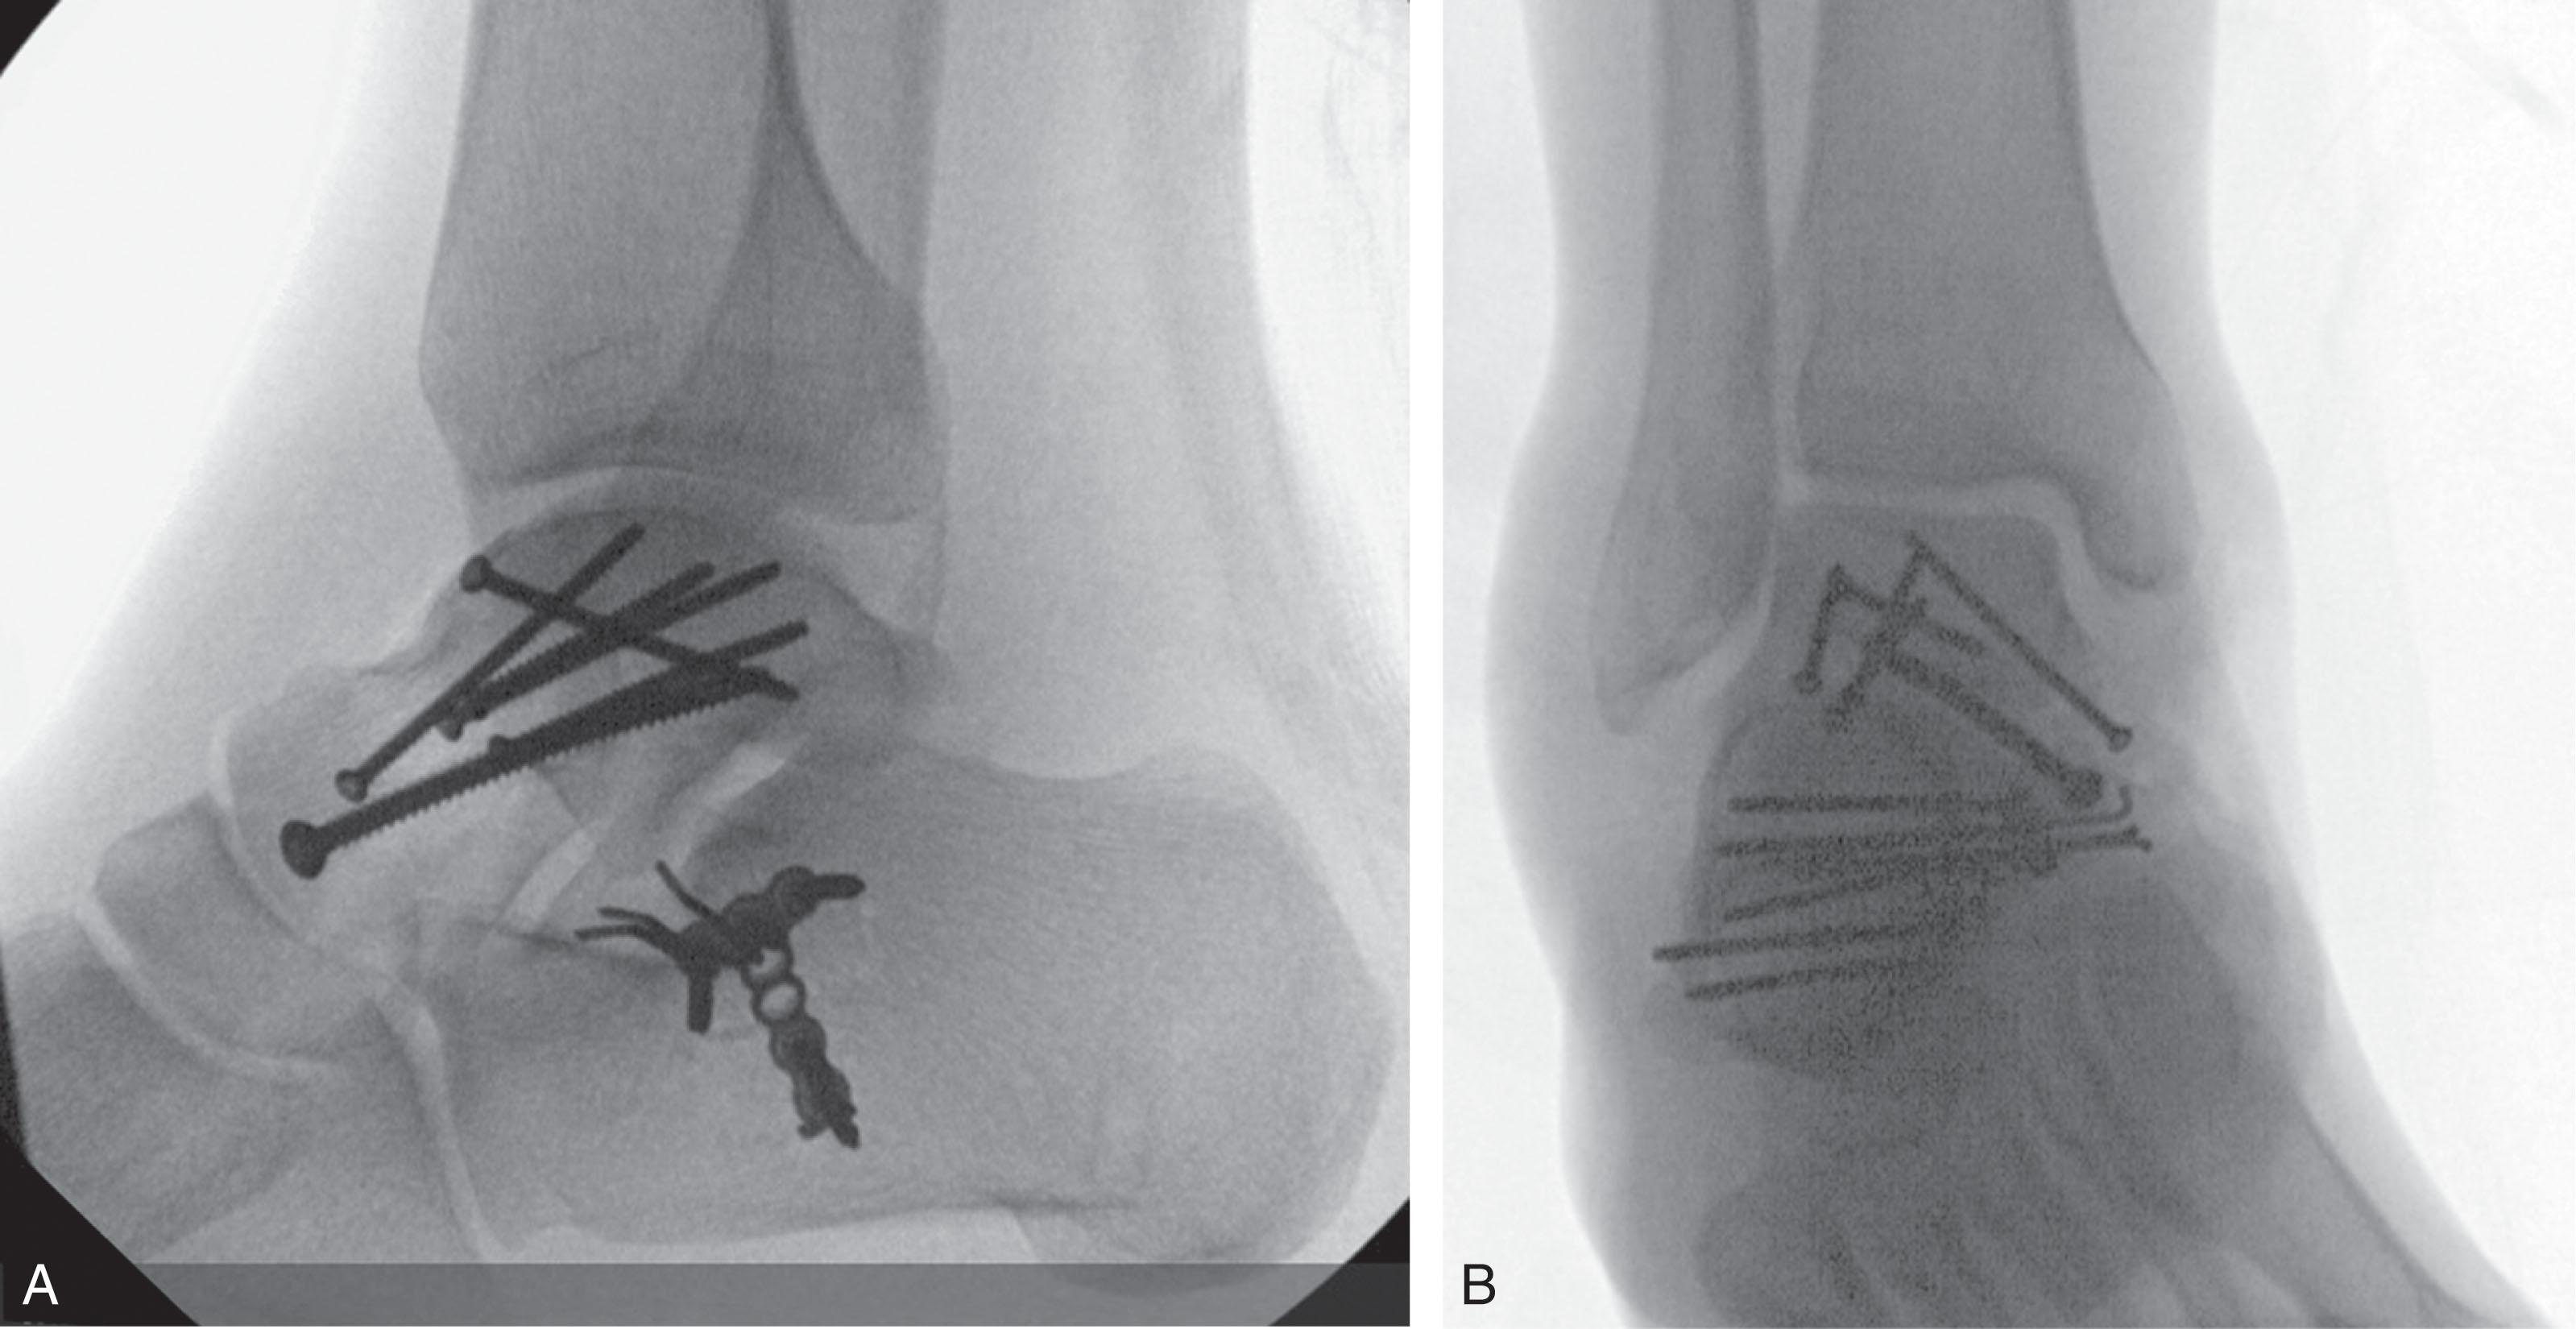 Fig. 46-16, (A) Lateral and (B) anteroposterior fluoroscopic views showing retrograde screw fixation of a displaced talar neck fracture.